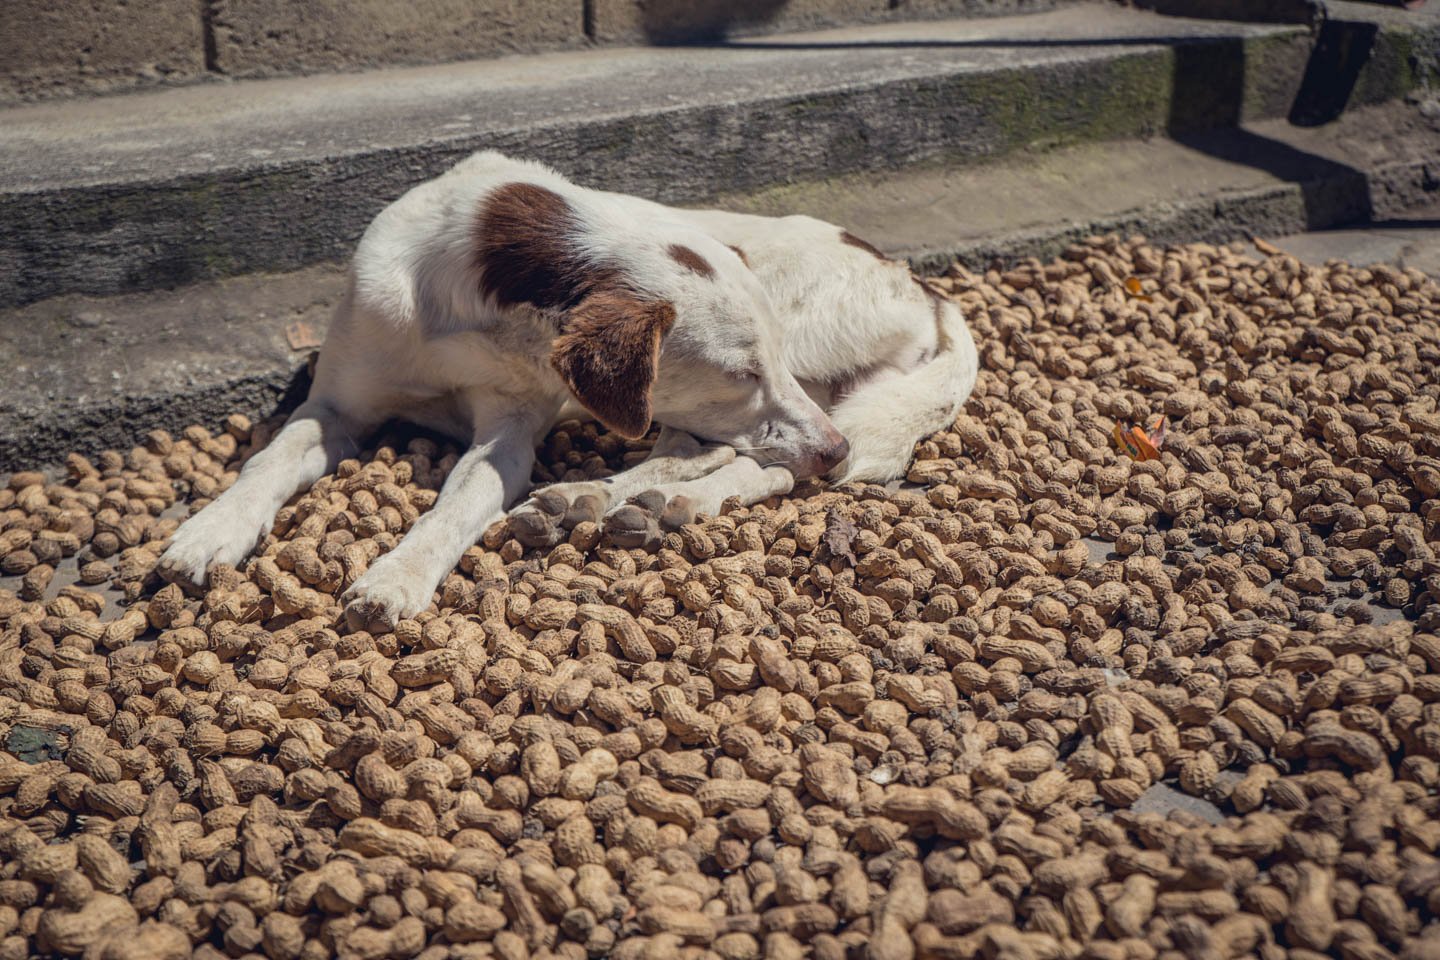 The peanuts, the spoils of the recent harvest, are left to dry in the hot afternoon sun. 